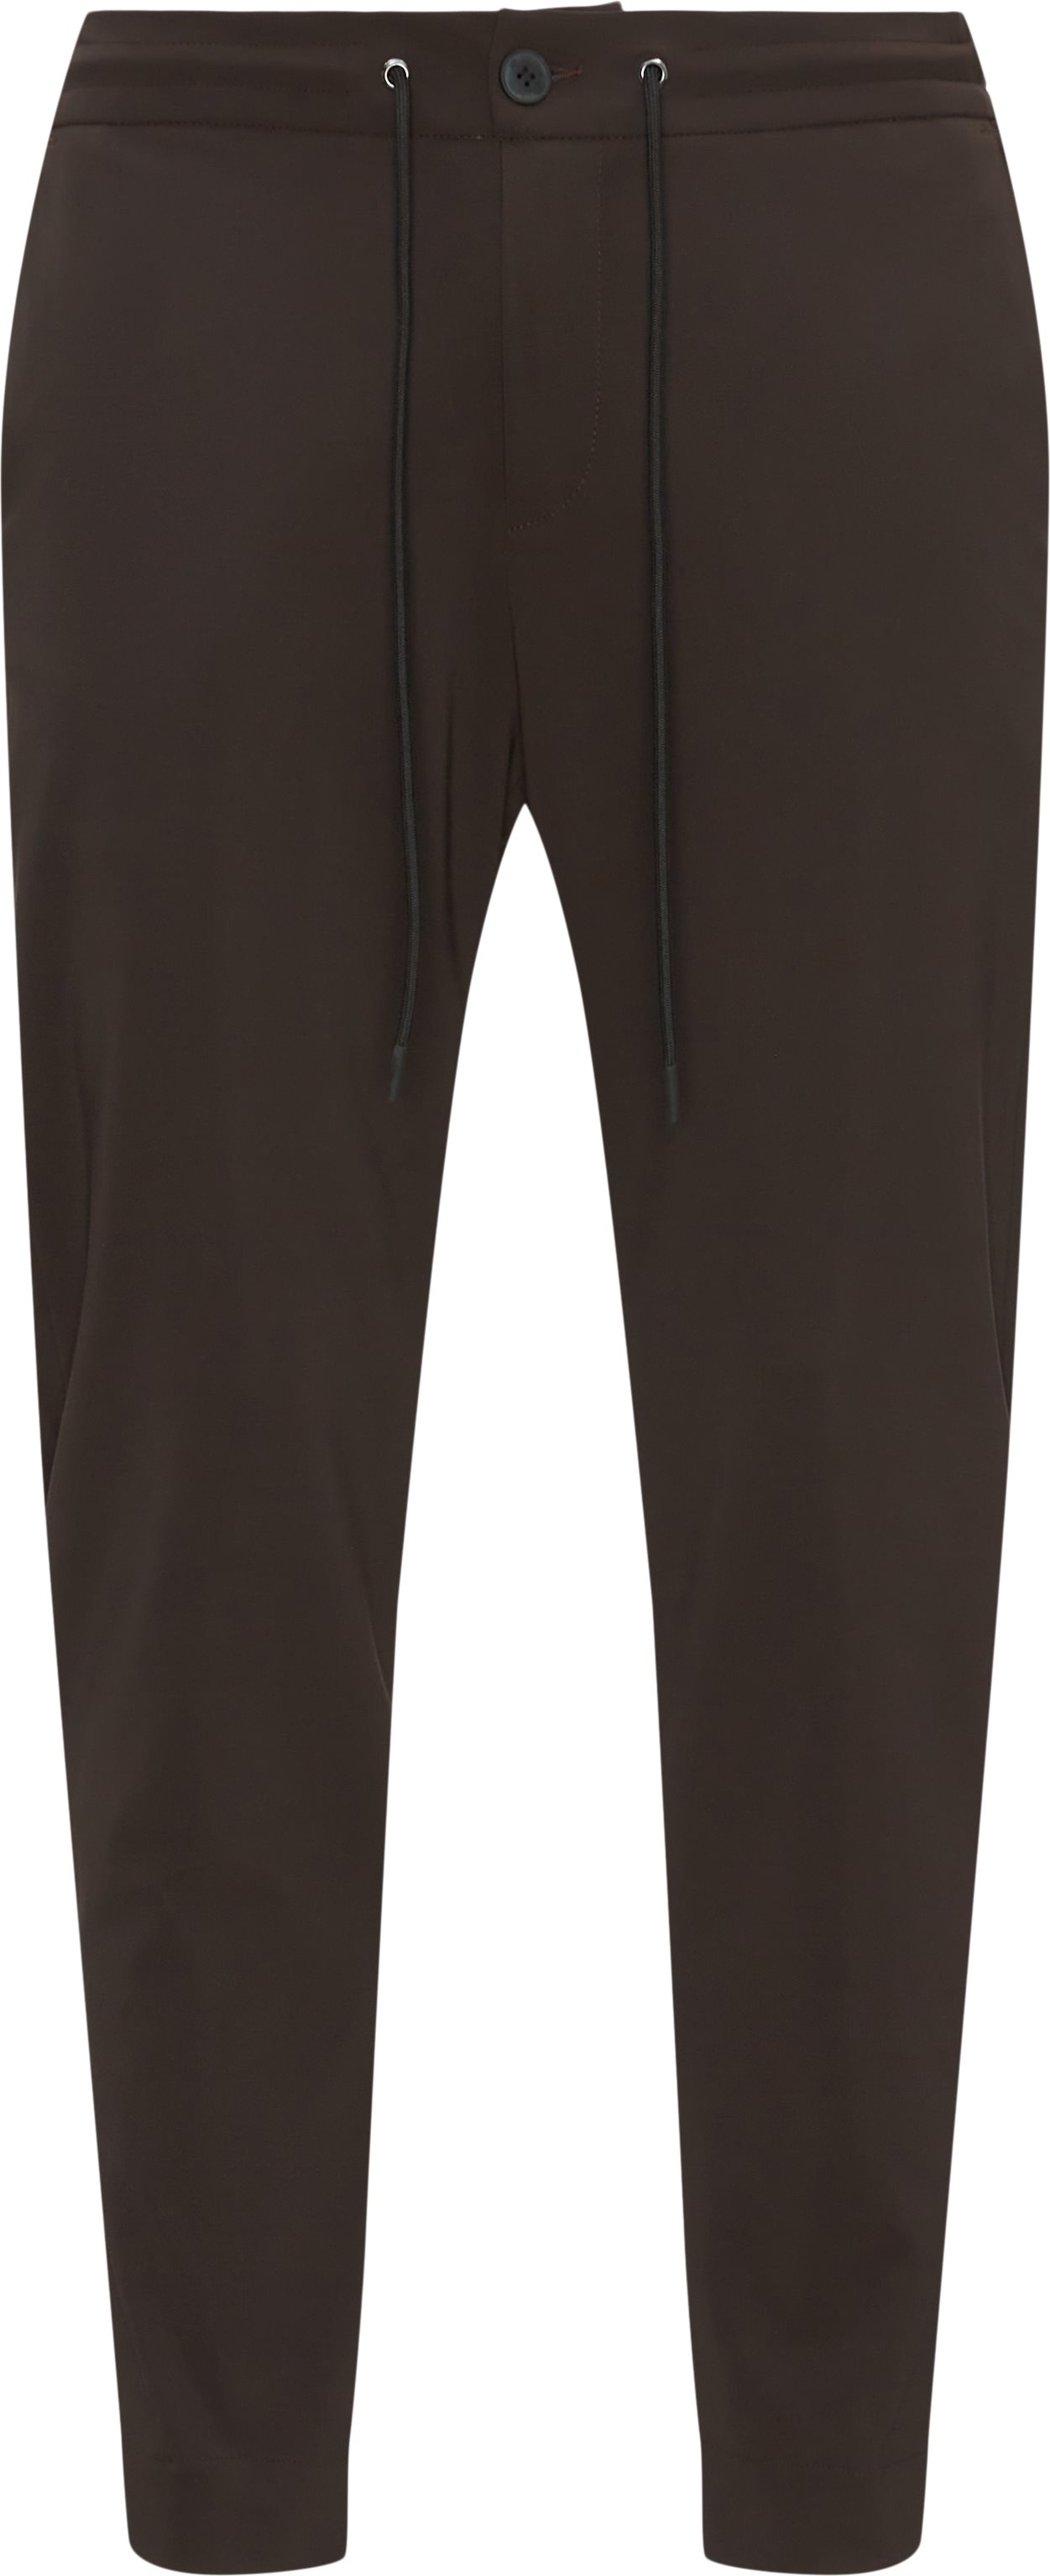 Tombolini Trousers PL30 IYQZ Brown